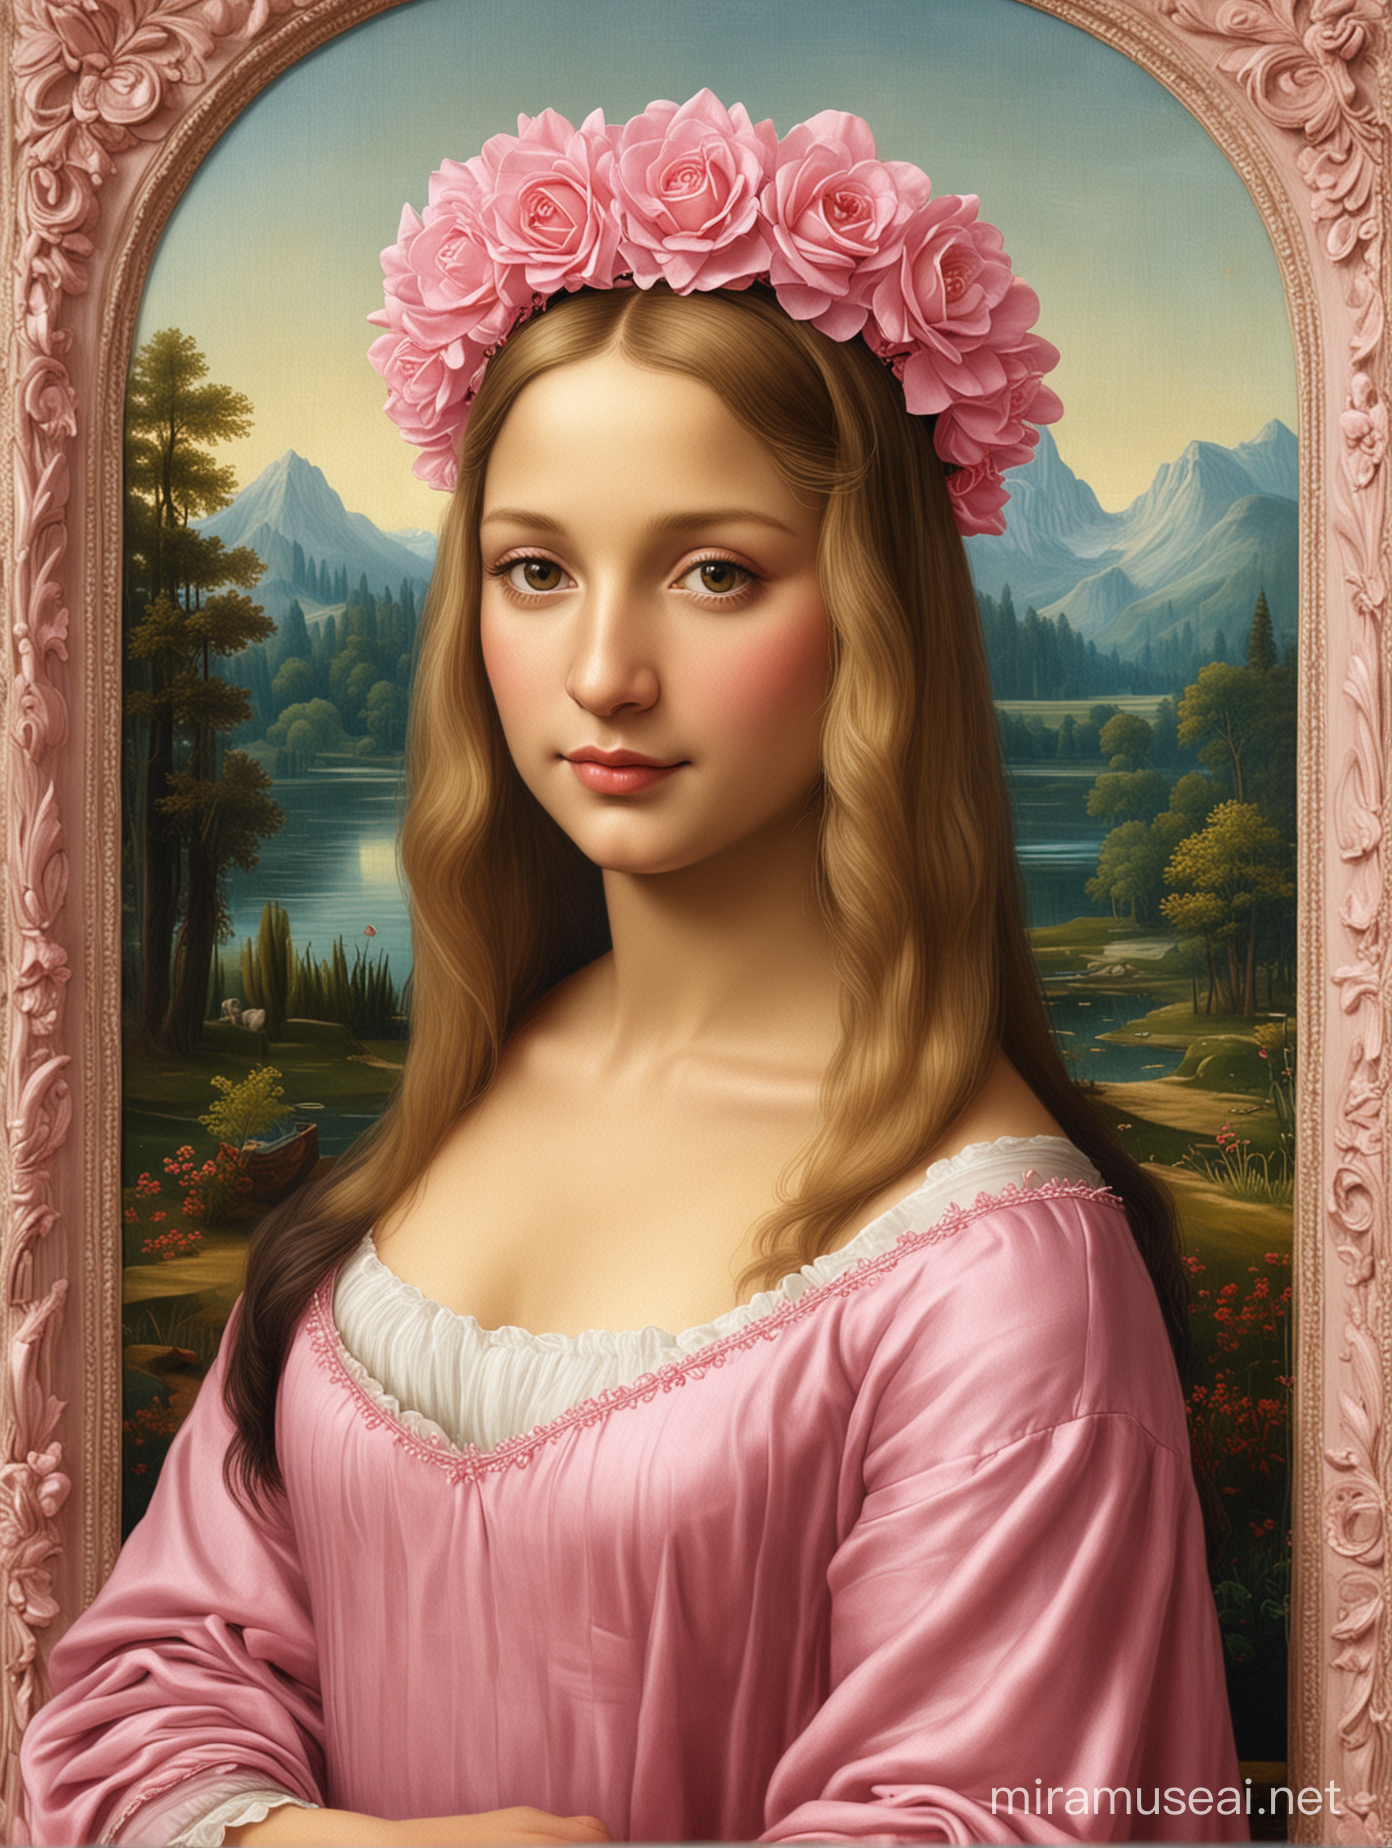 I want Mona Lisa to be in nature with blonde hair and bangs and a pink tiara and pink wreath dress